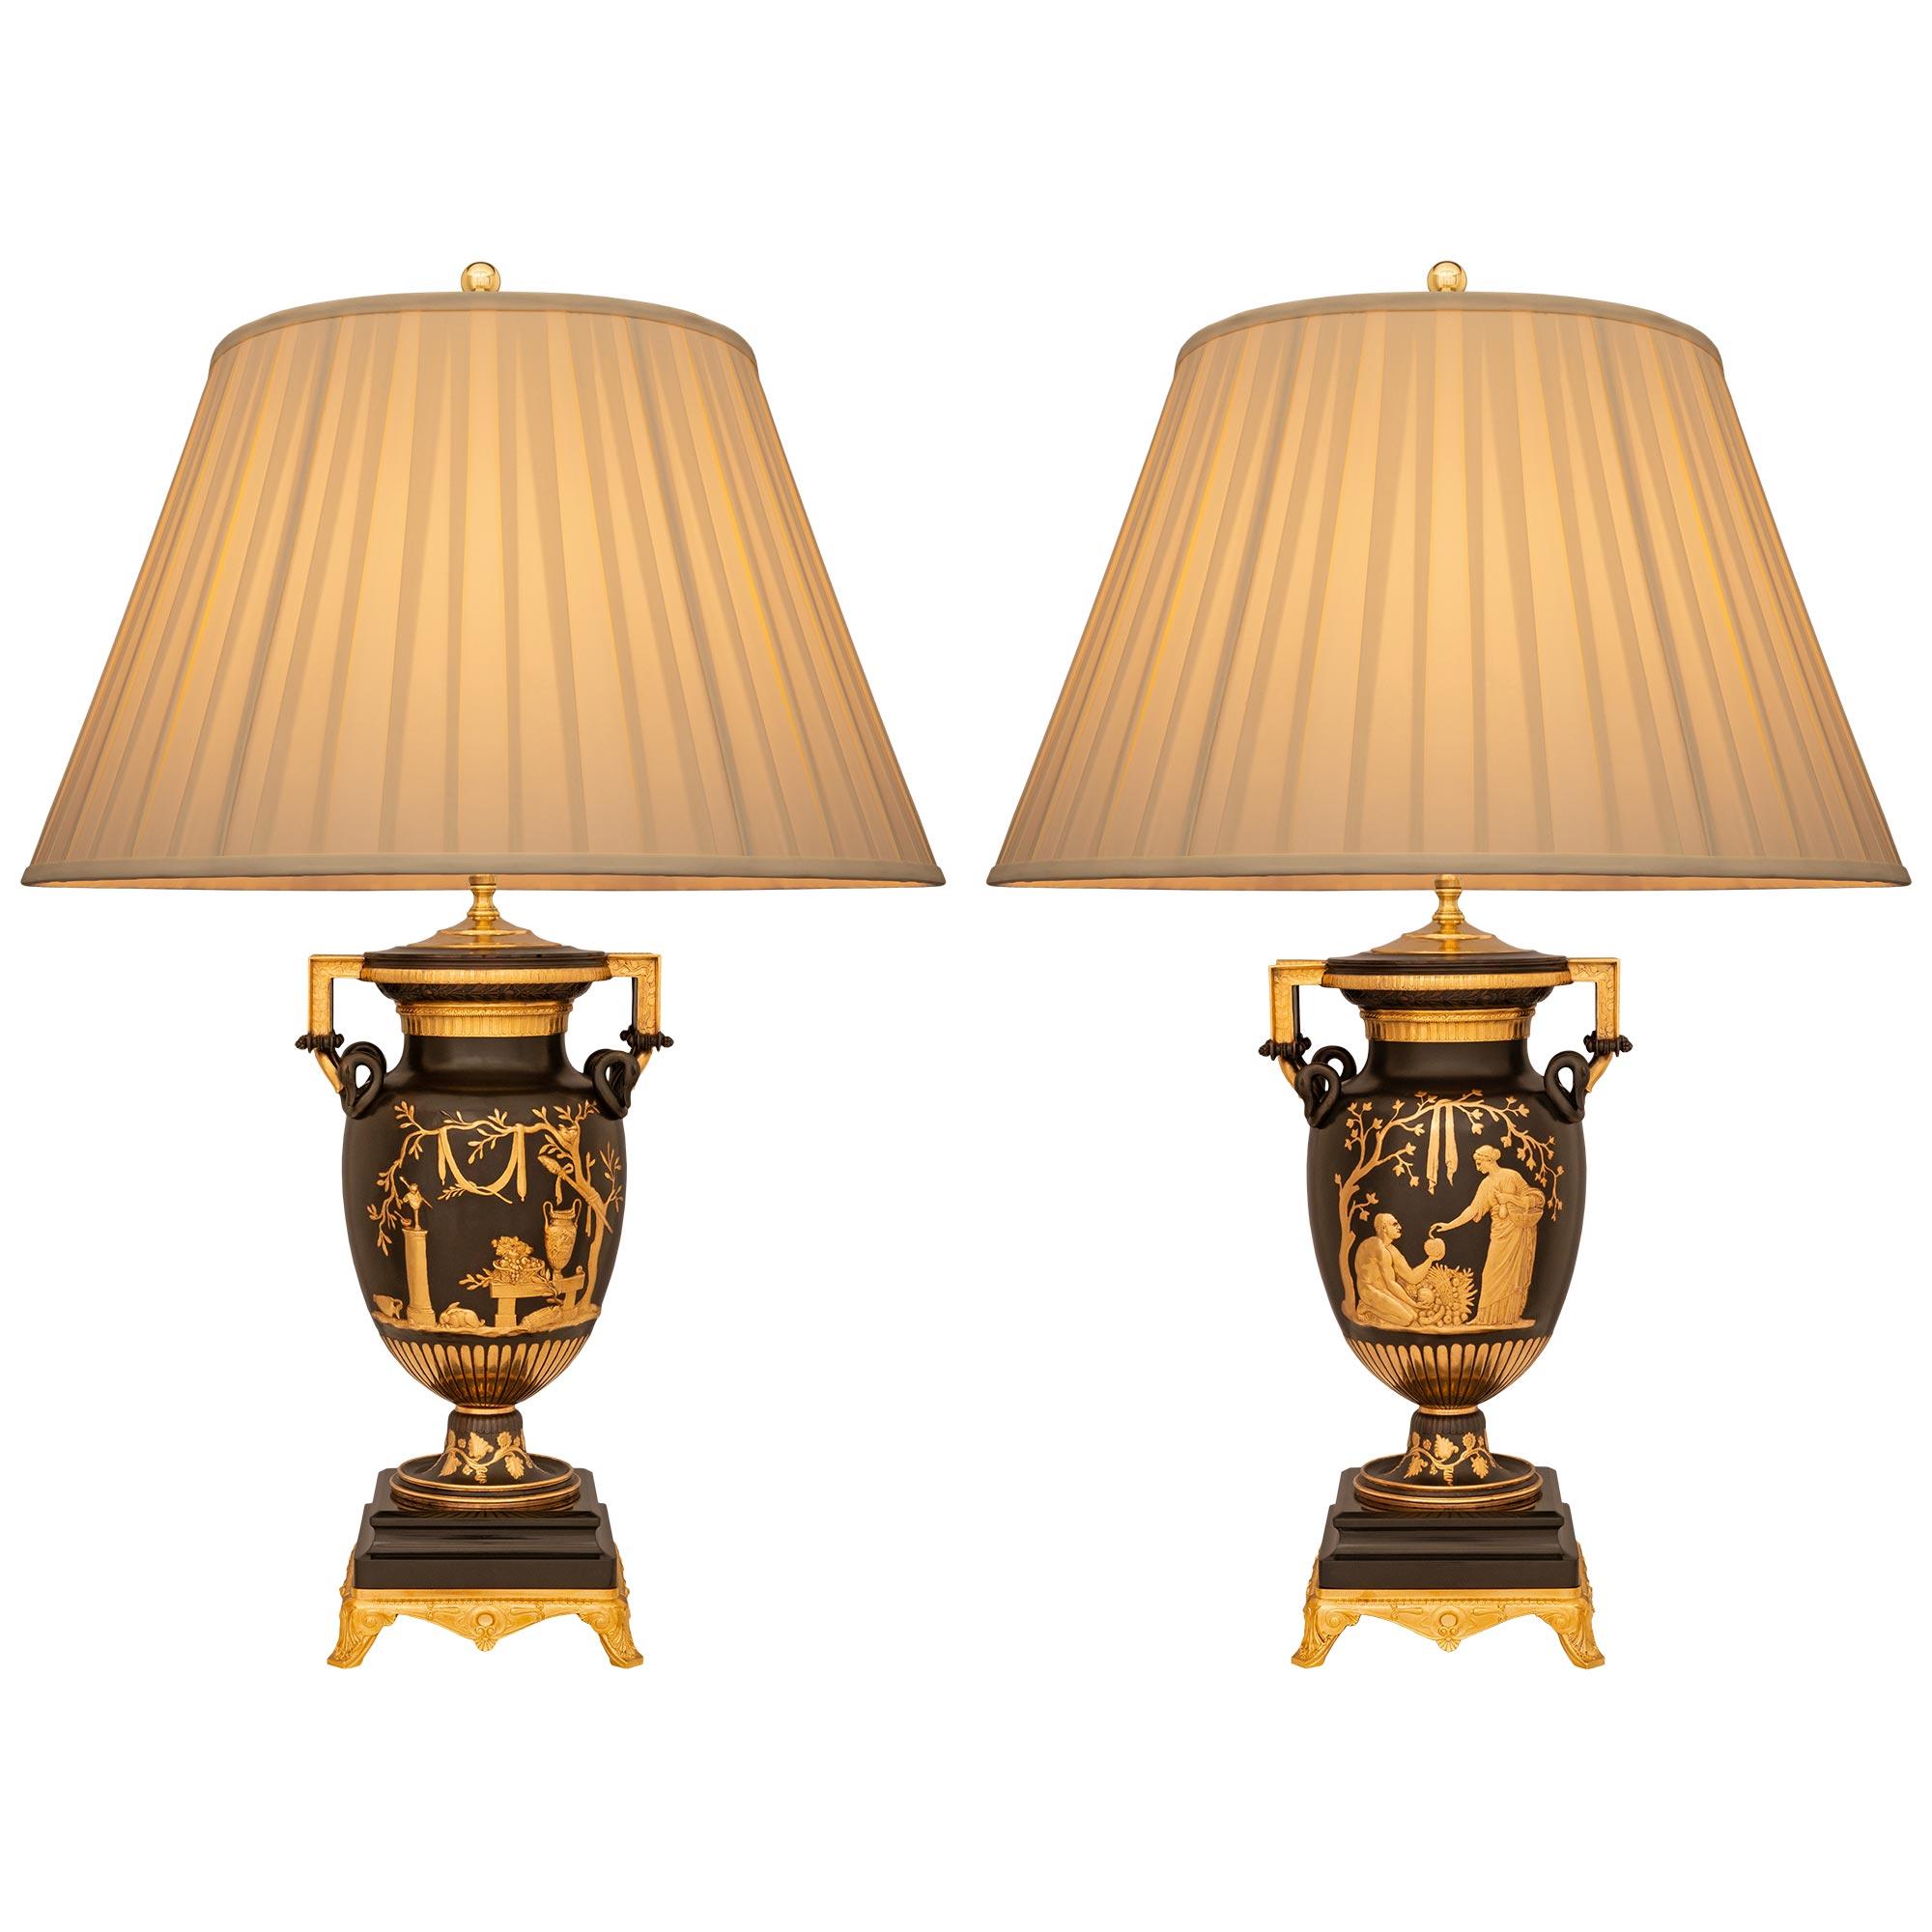 Pair Of French 19th Century Belle Epoque Period Bronze, Marble, & Ormolu Lamps For Sale 3